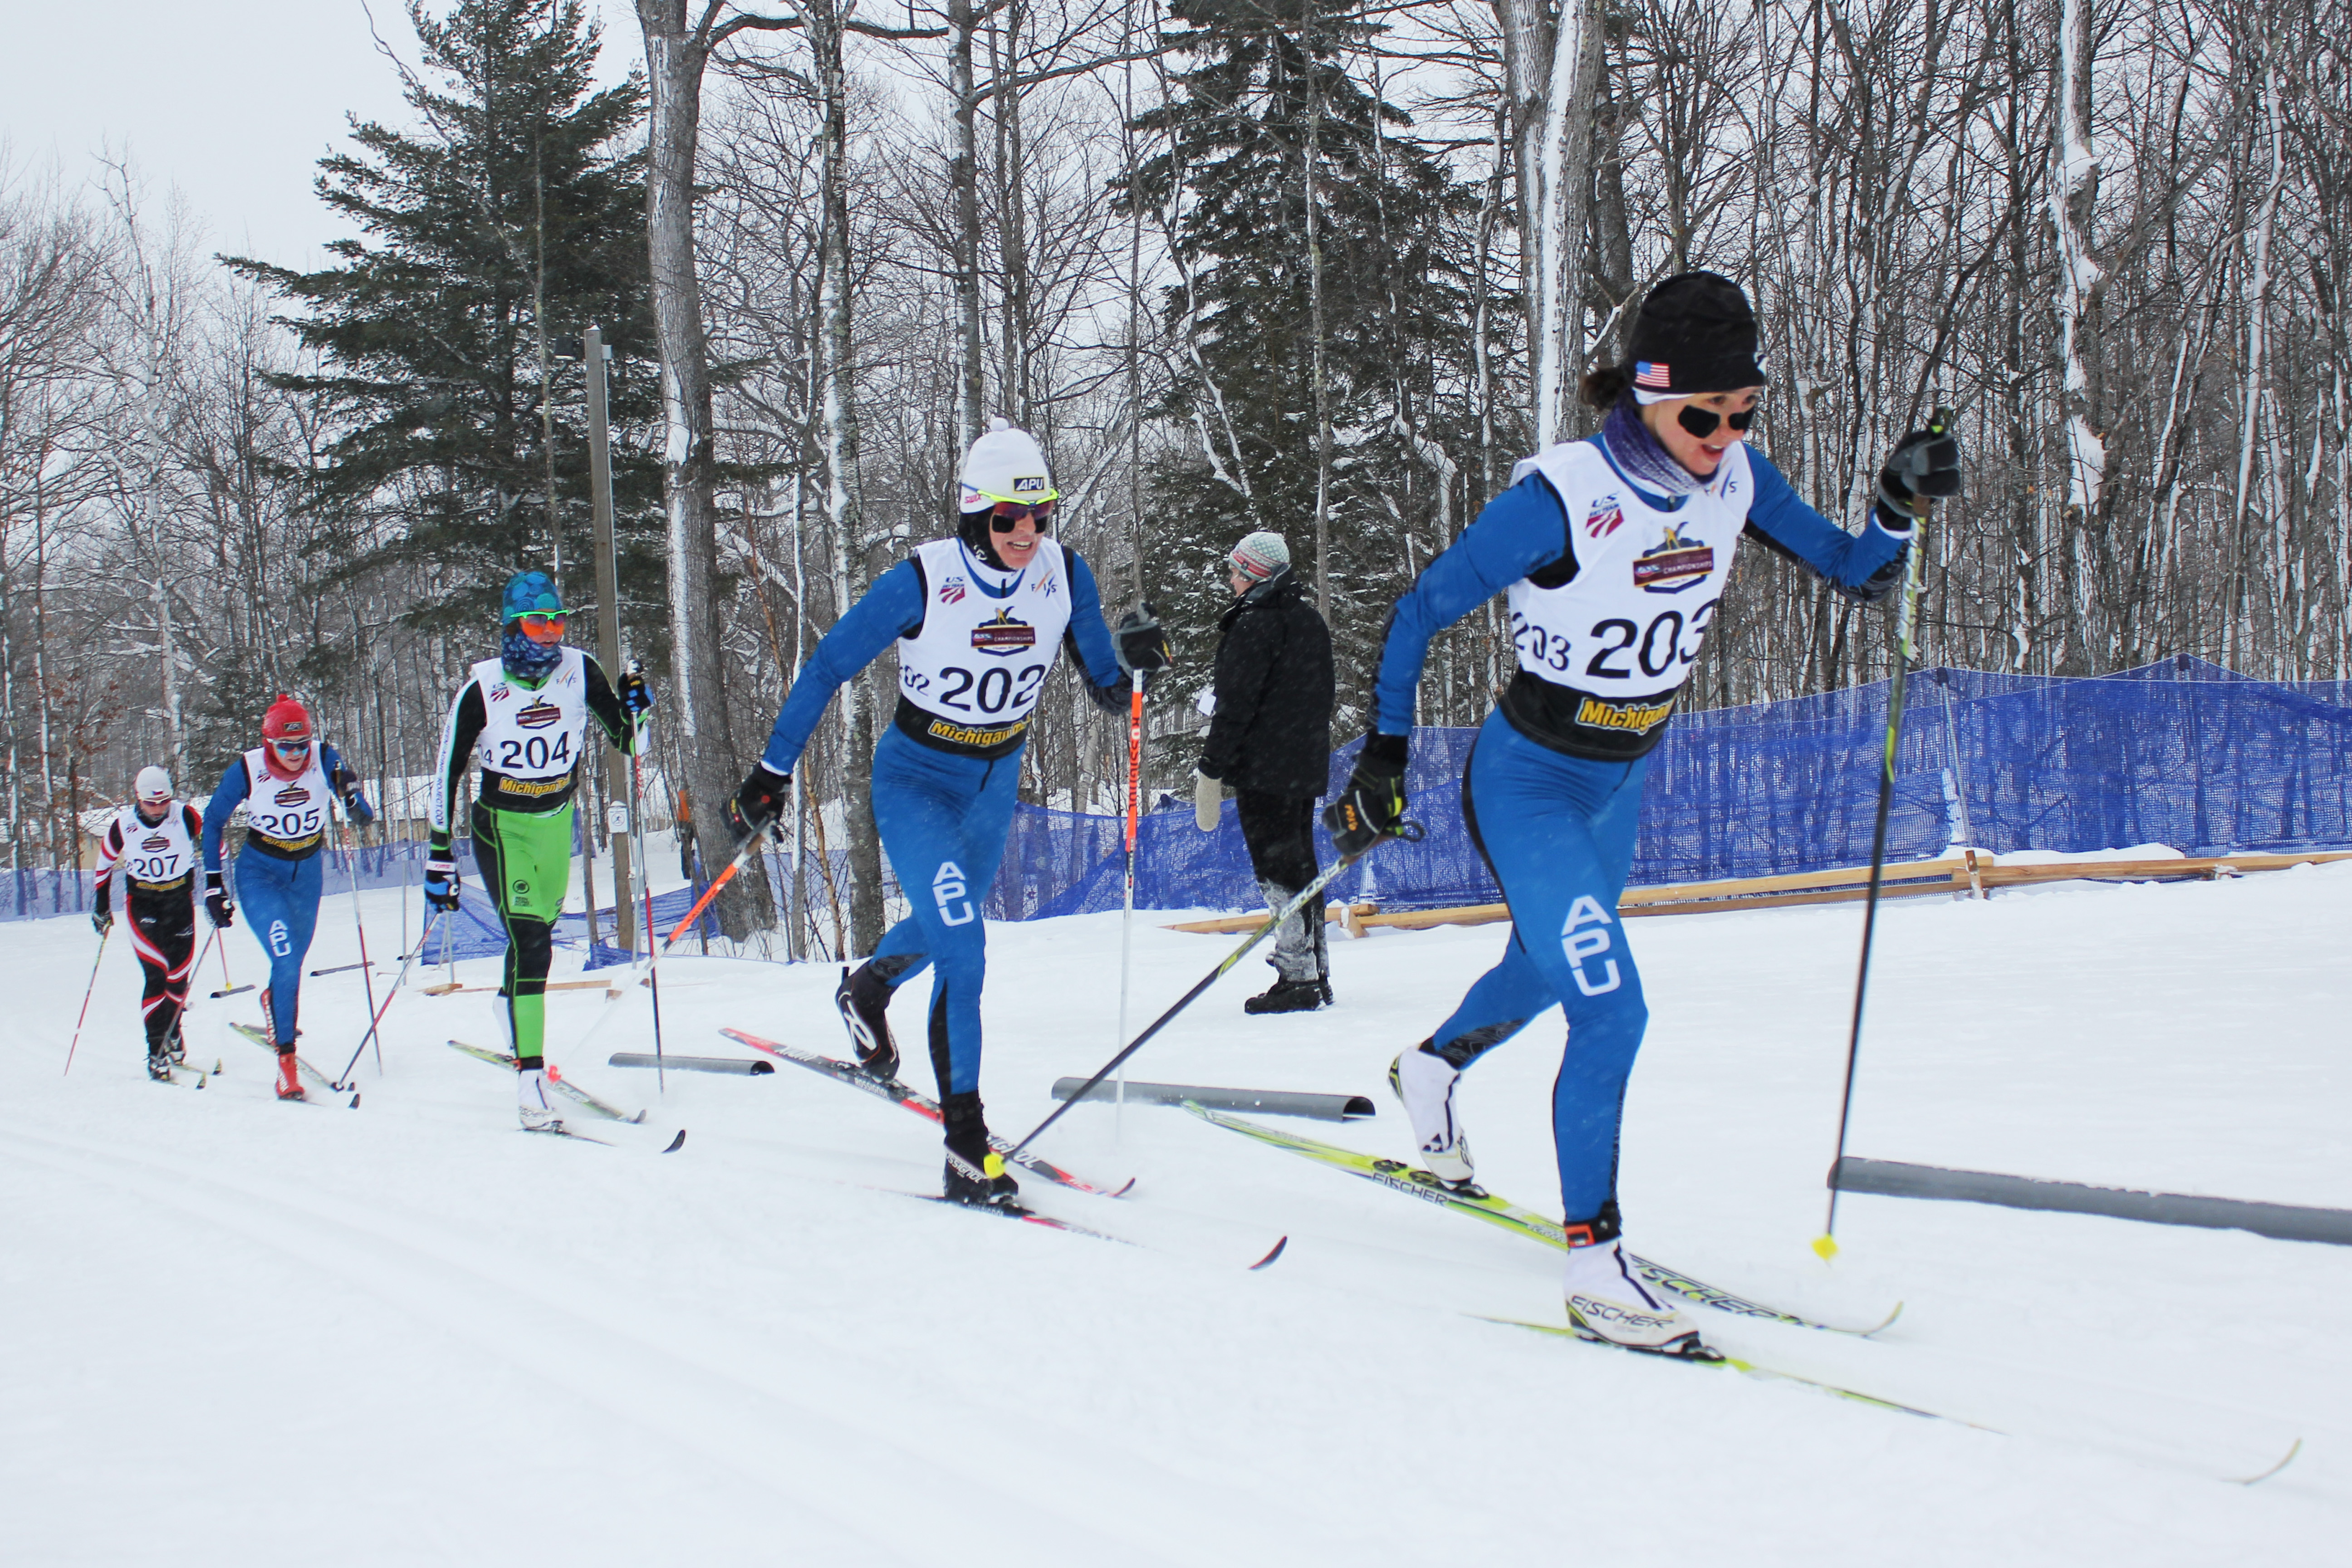 Chelsea Holmes (APU) leads Rosie Brennan (APU), Caitlin Patterson (CGRP), Becca Rorabaugh (APU), and Eliska Hajkova (BJRNT) in the women's 20 k mass start at the 2015 U.S. Cross Country Championships in Houghton, Mich.